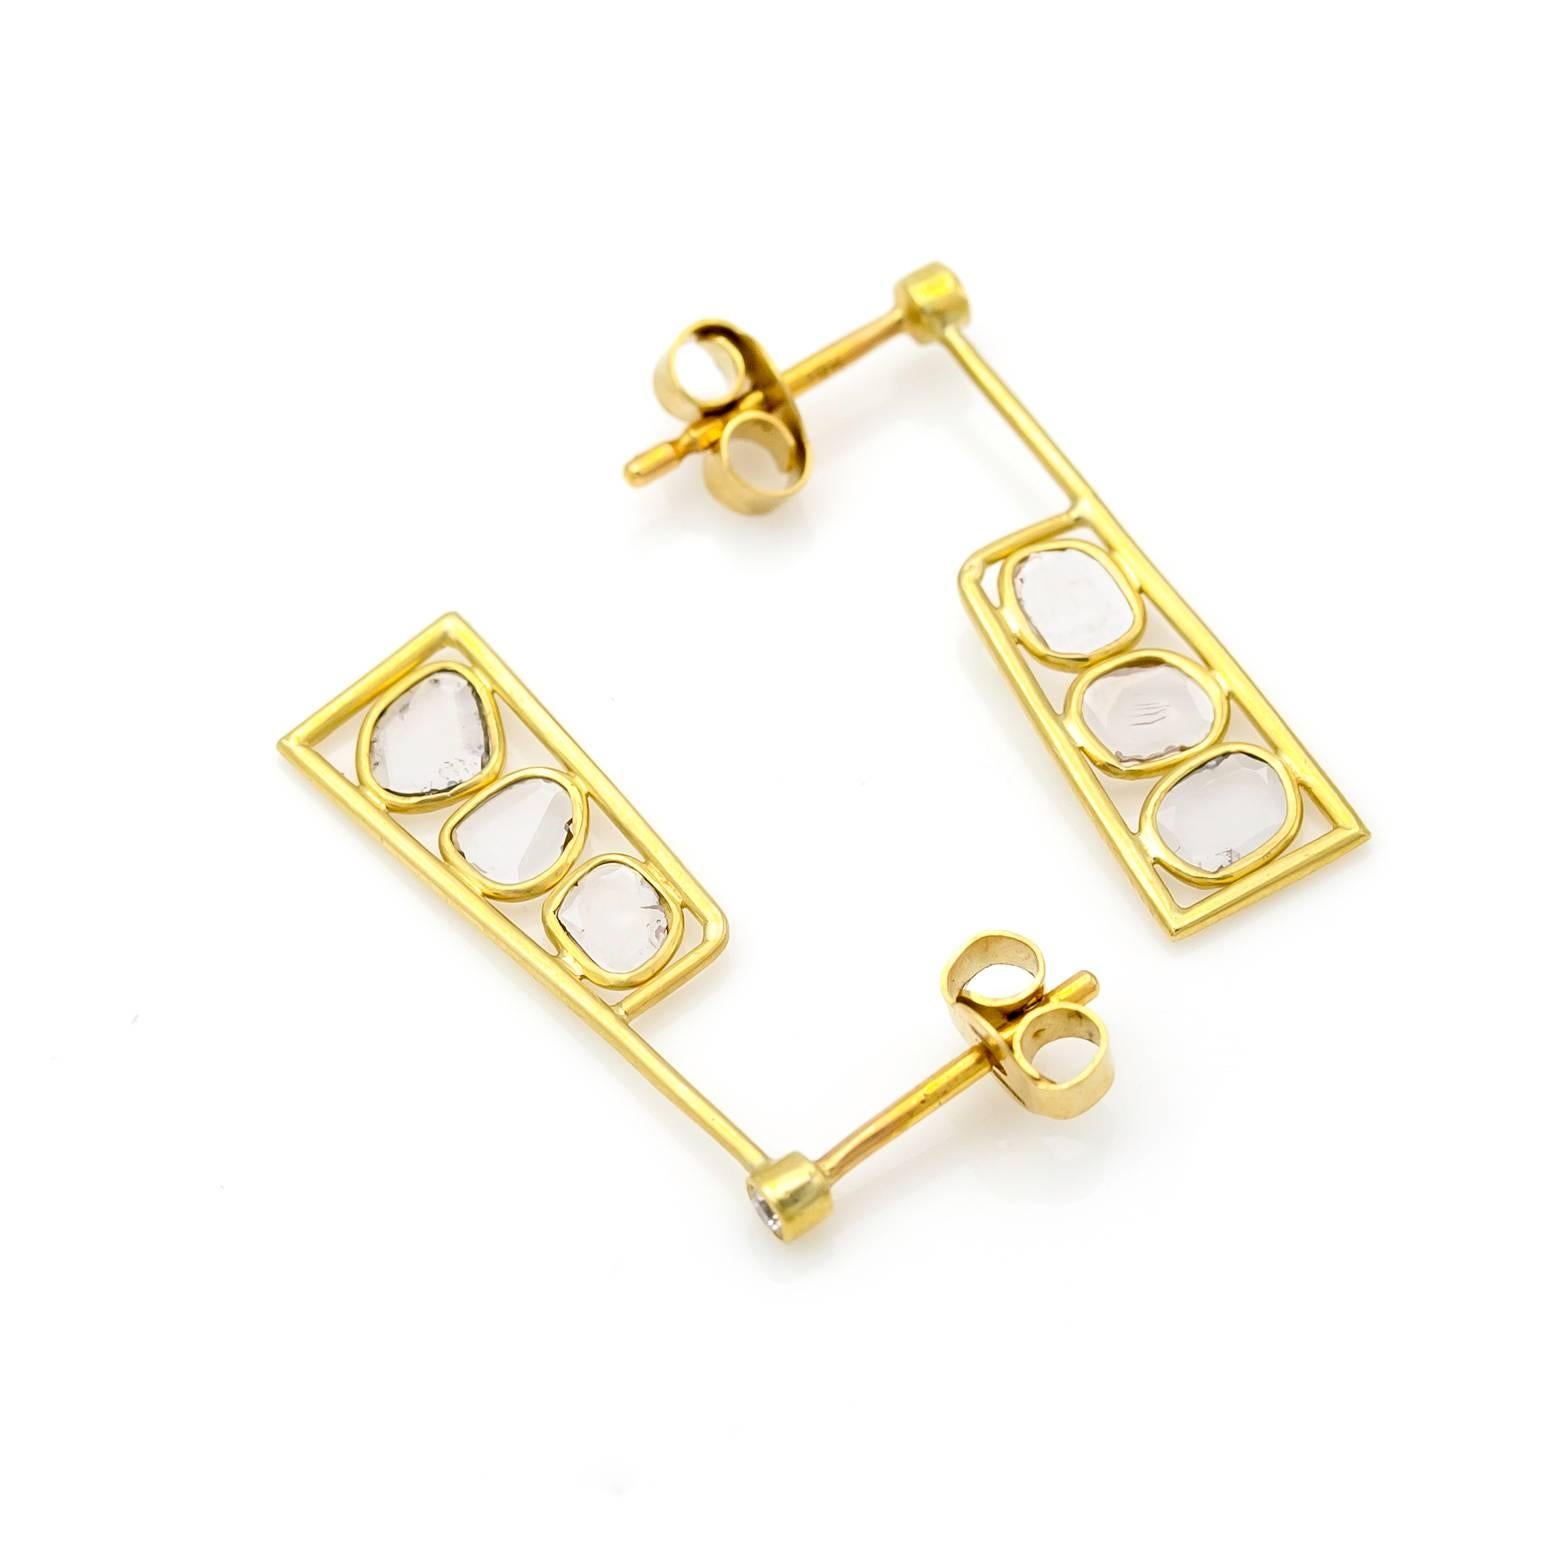 Modern Satin Yellow Gold and Rose Cut Diamond Square Rectangle Post Earrings